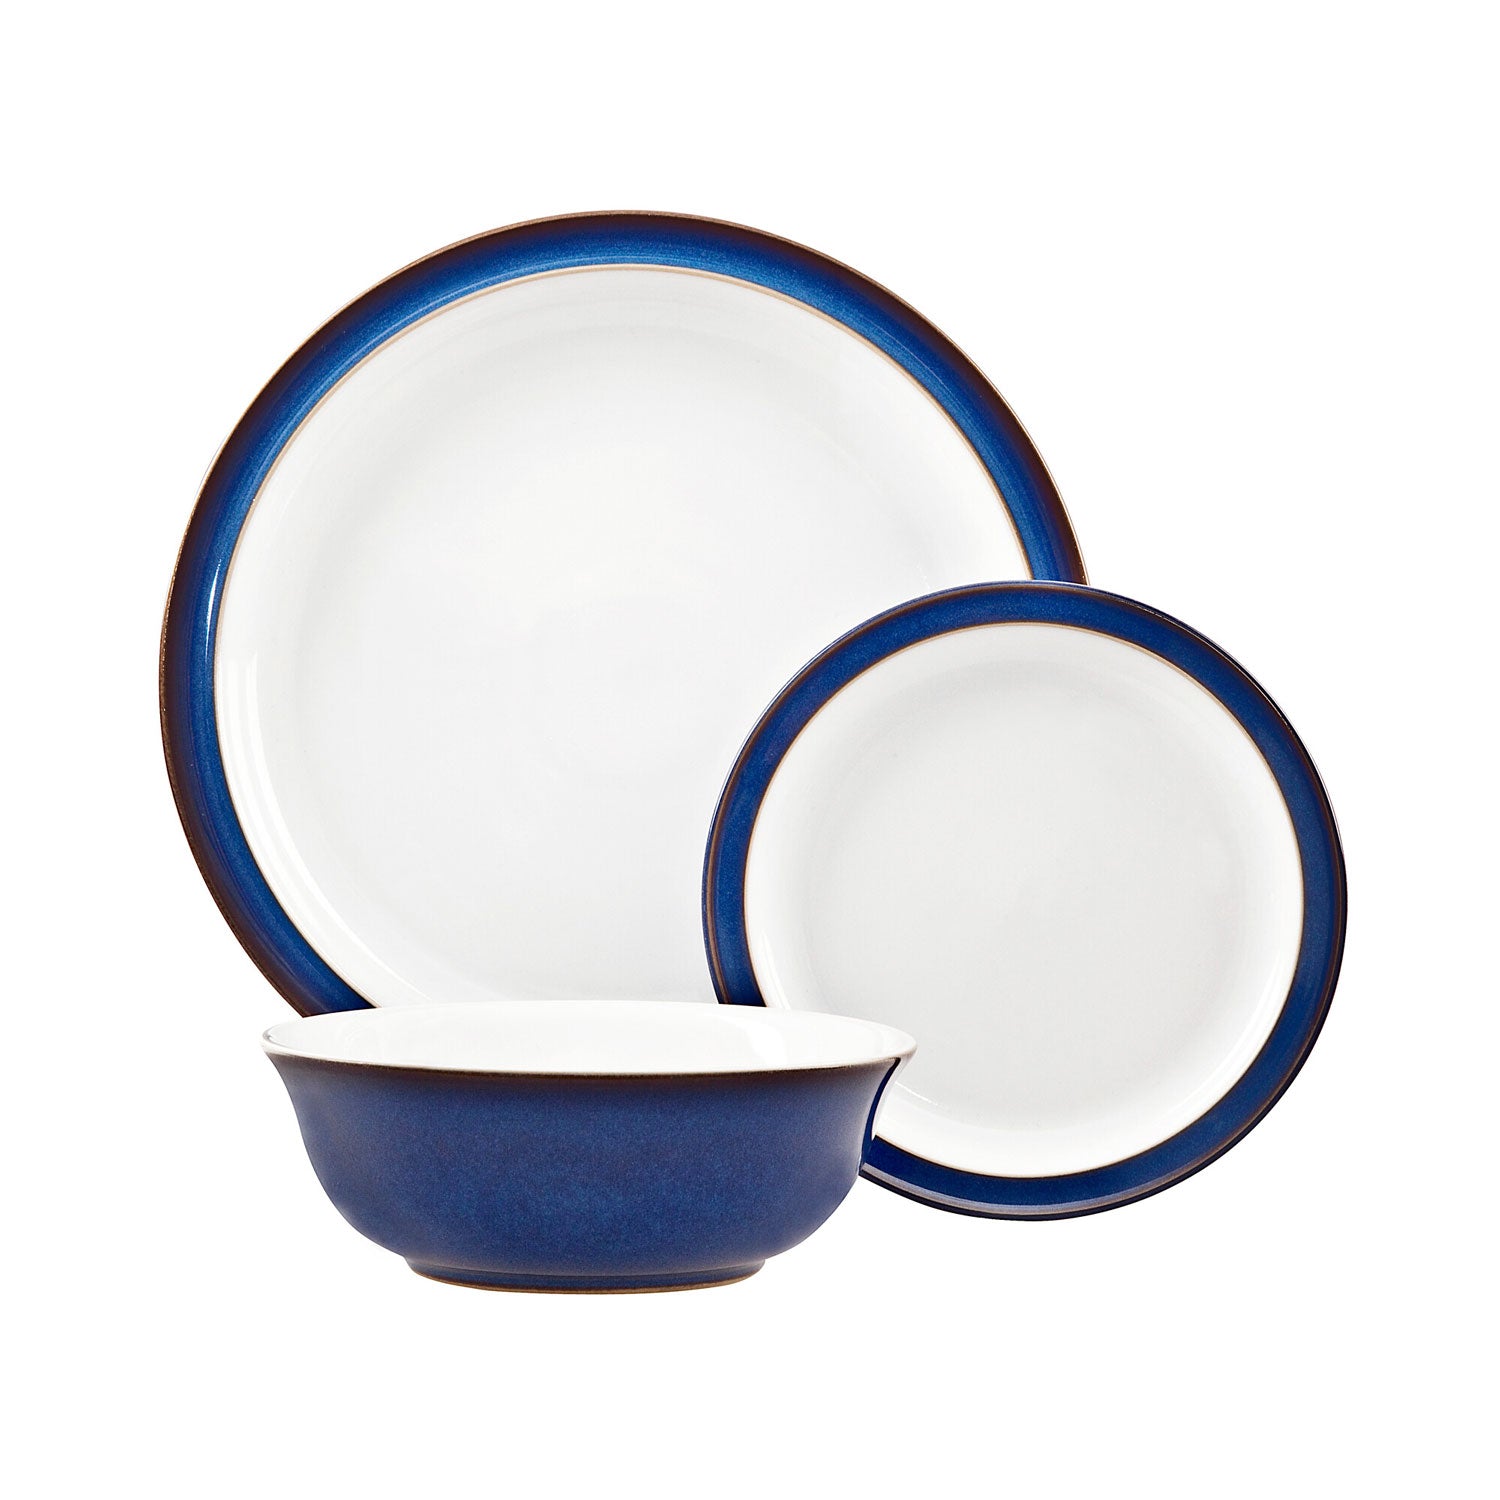 Denby 12 Piece Tableware Set - Imperial Blue 3 Shaws Department Stores